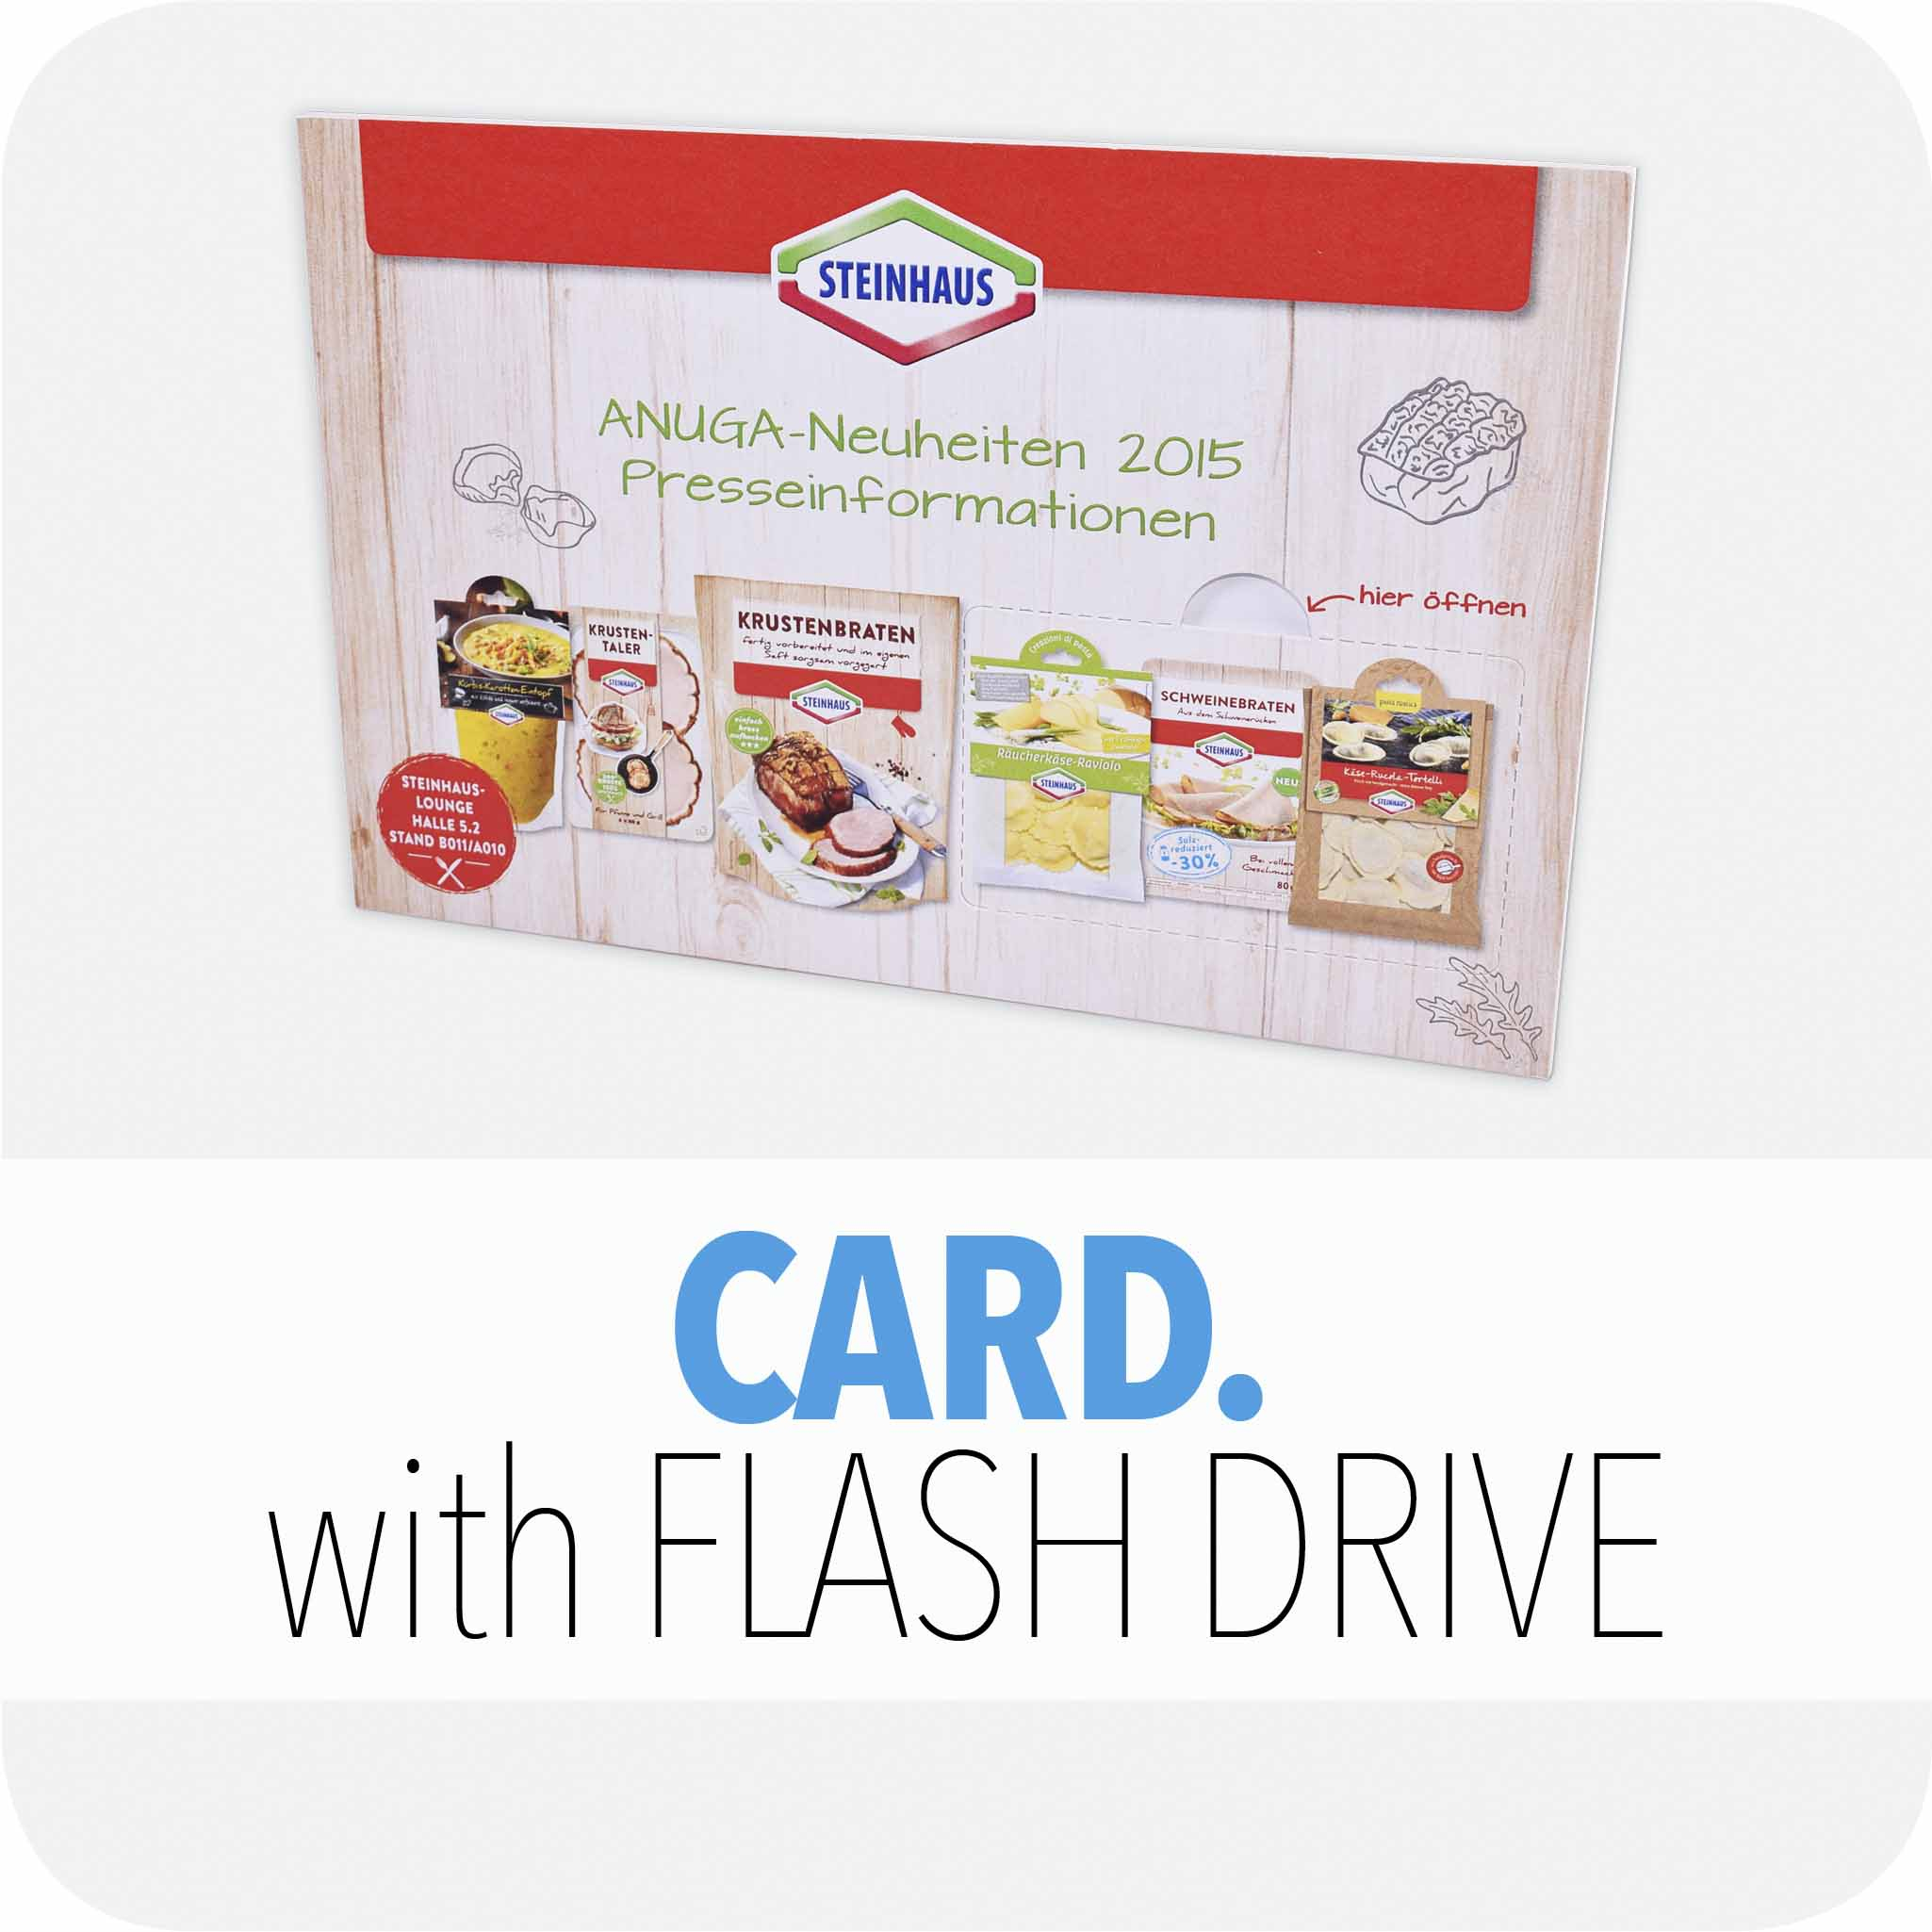 Card with flash drive